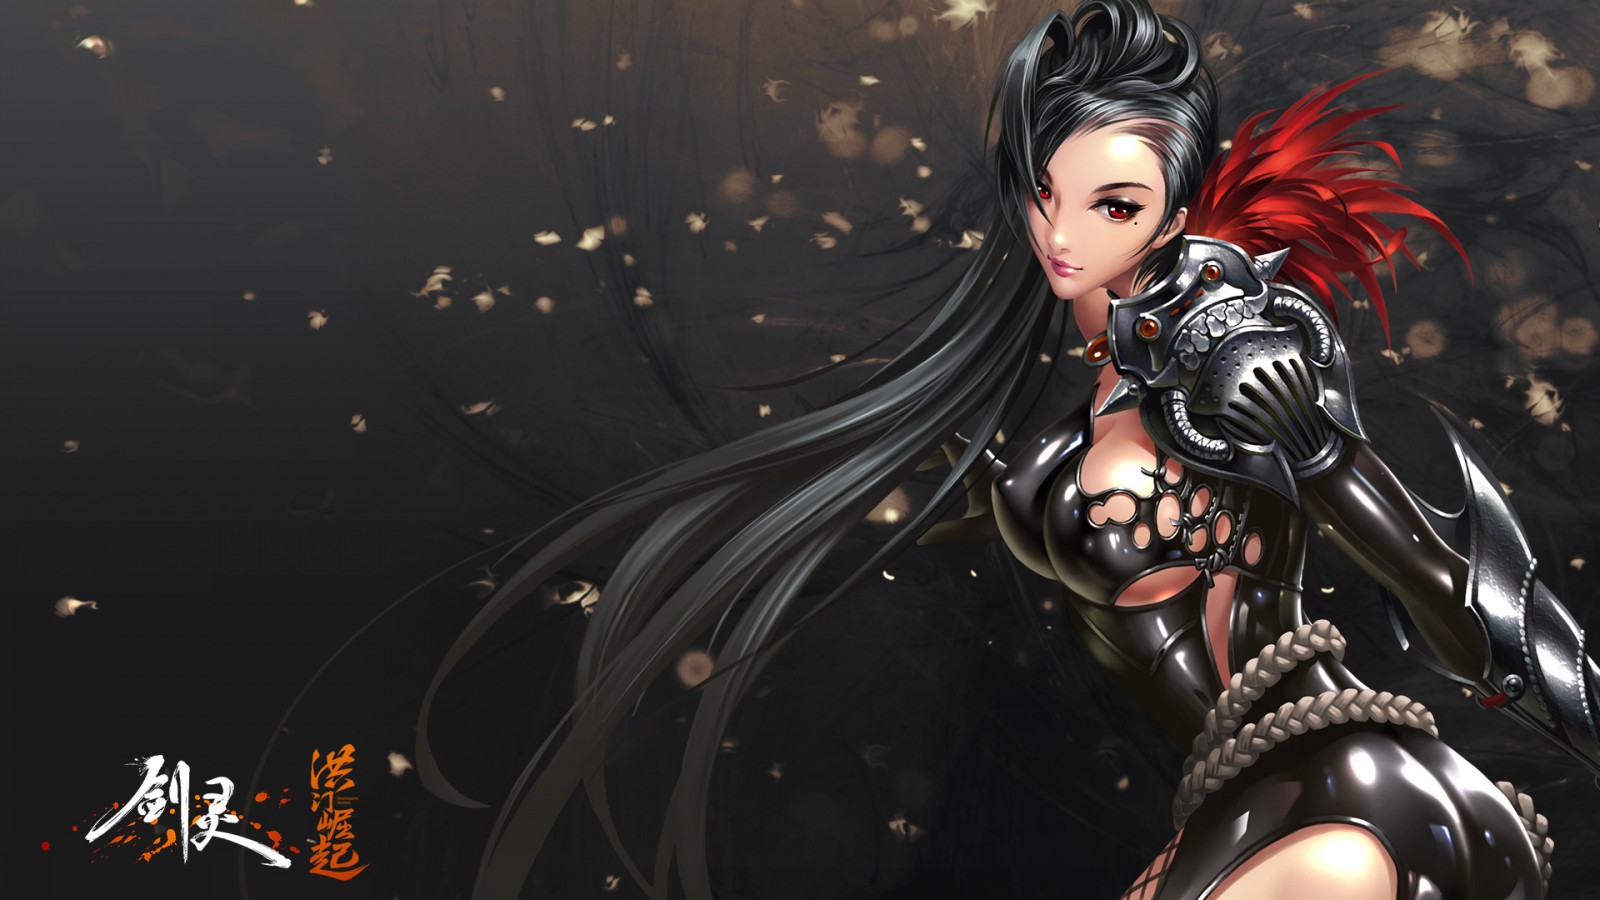 Is Blade & Soul Worth Playing in 2019?